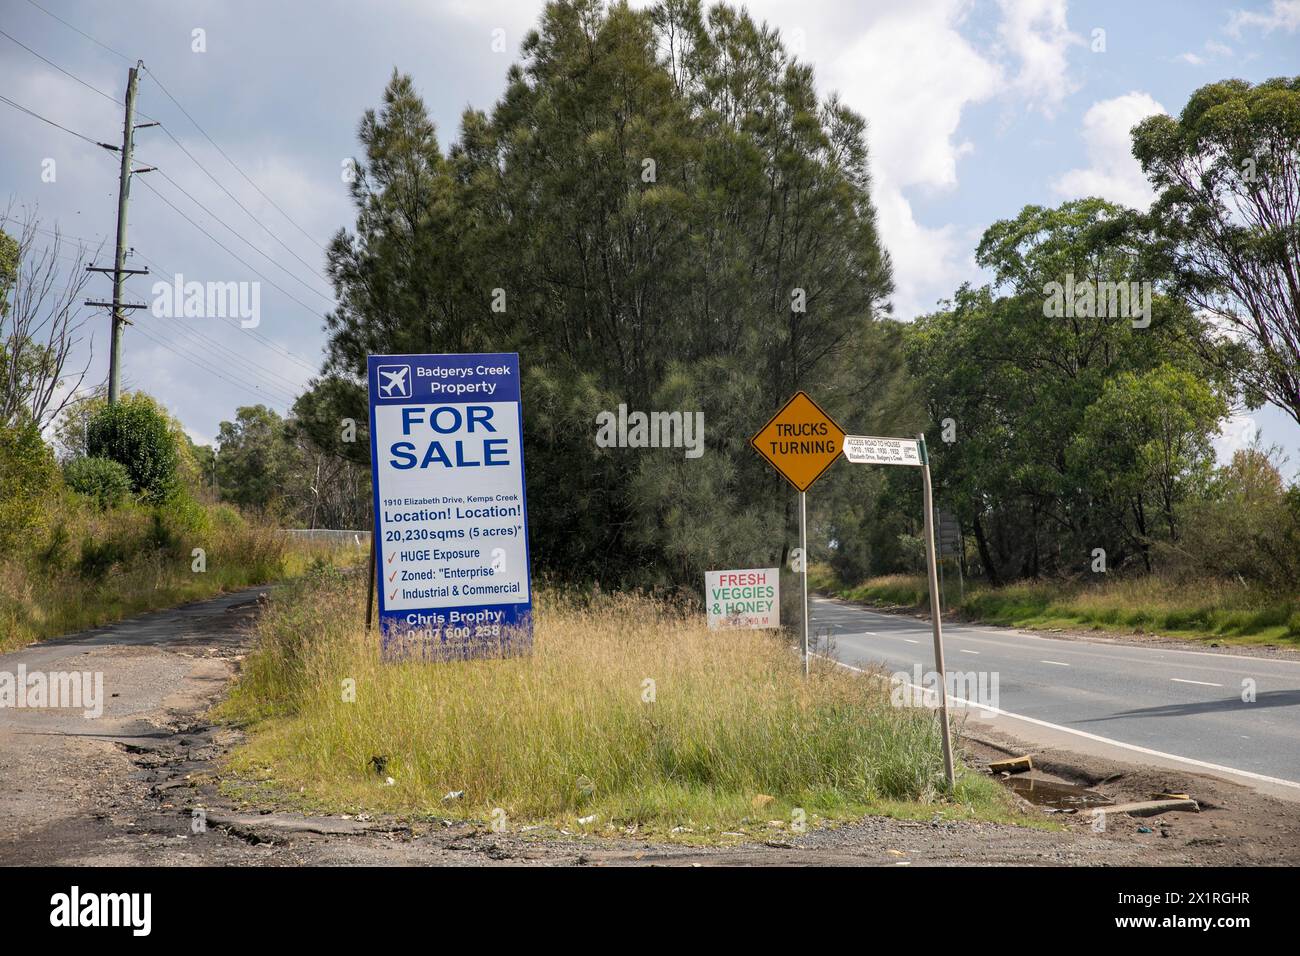 Greater Western Sydney region, Badgerys Creek Property agent advertising 5 acres of land for sale between Badgerys Creek and Luddenham, near airport Stock Photo